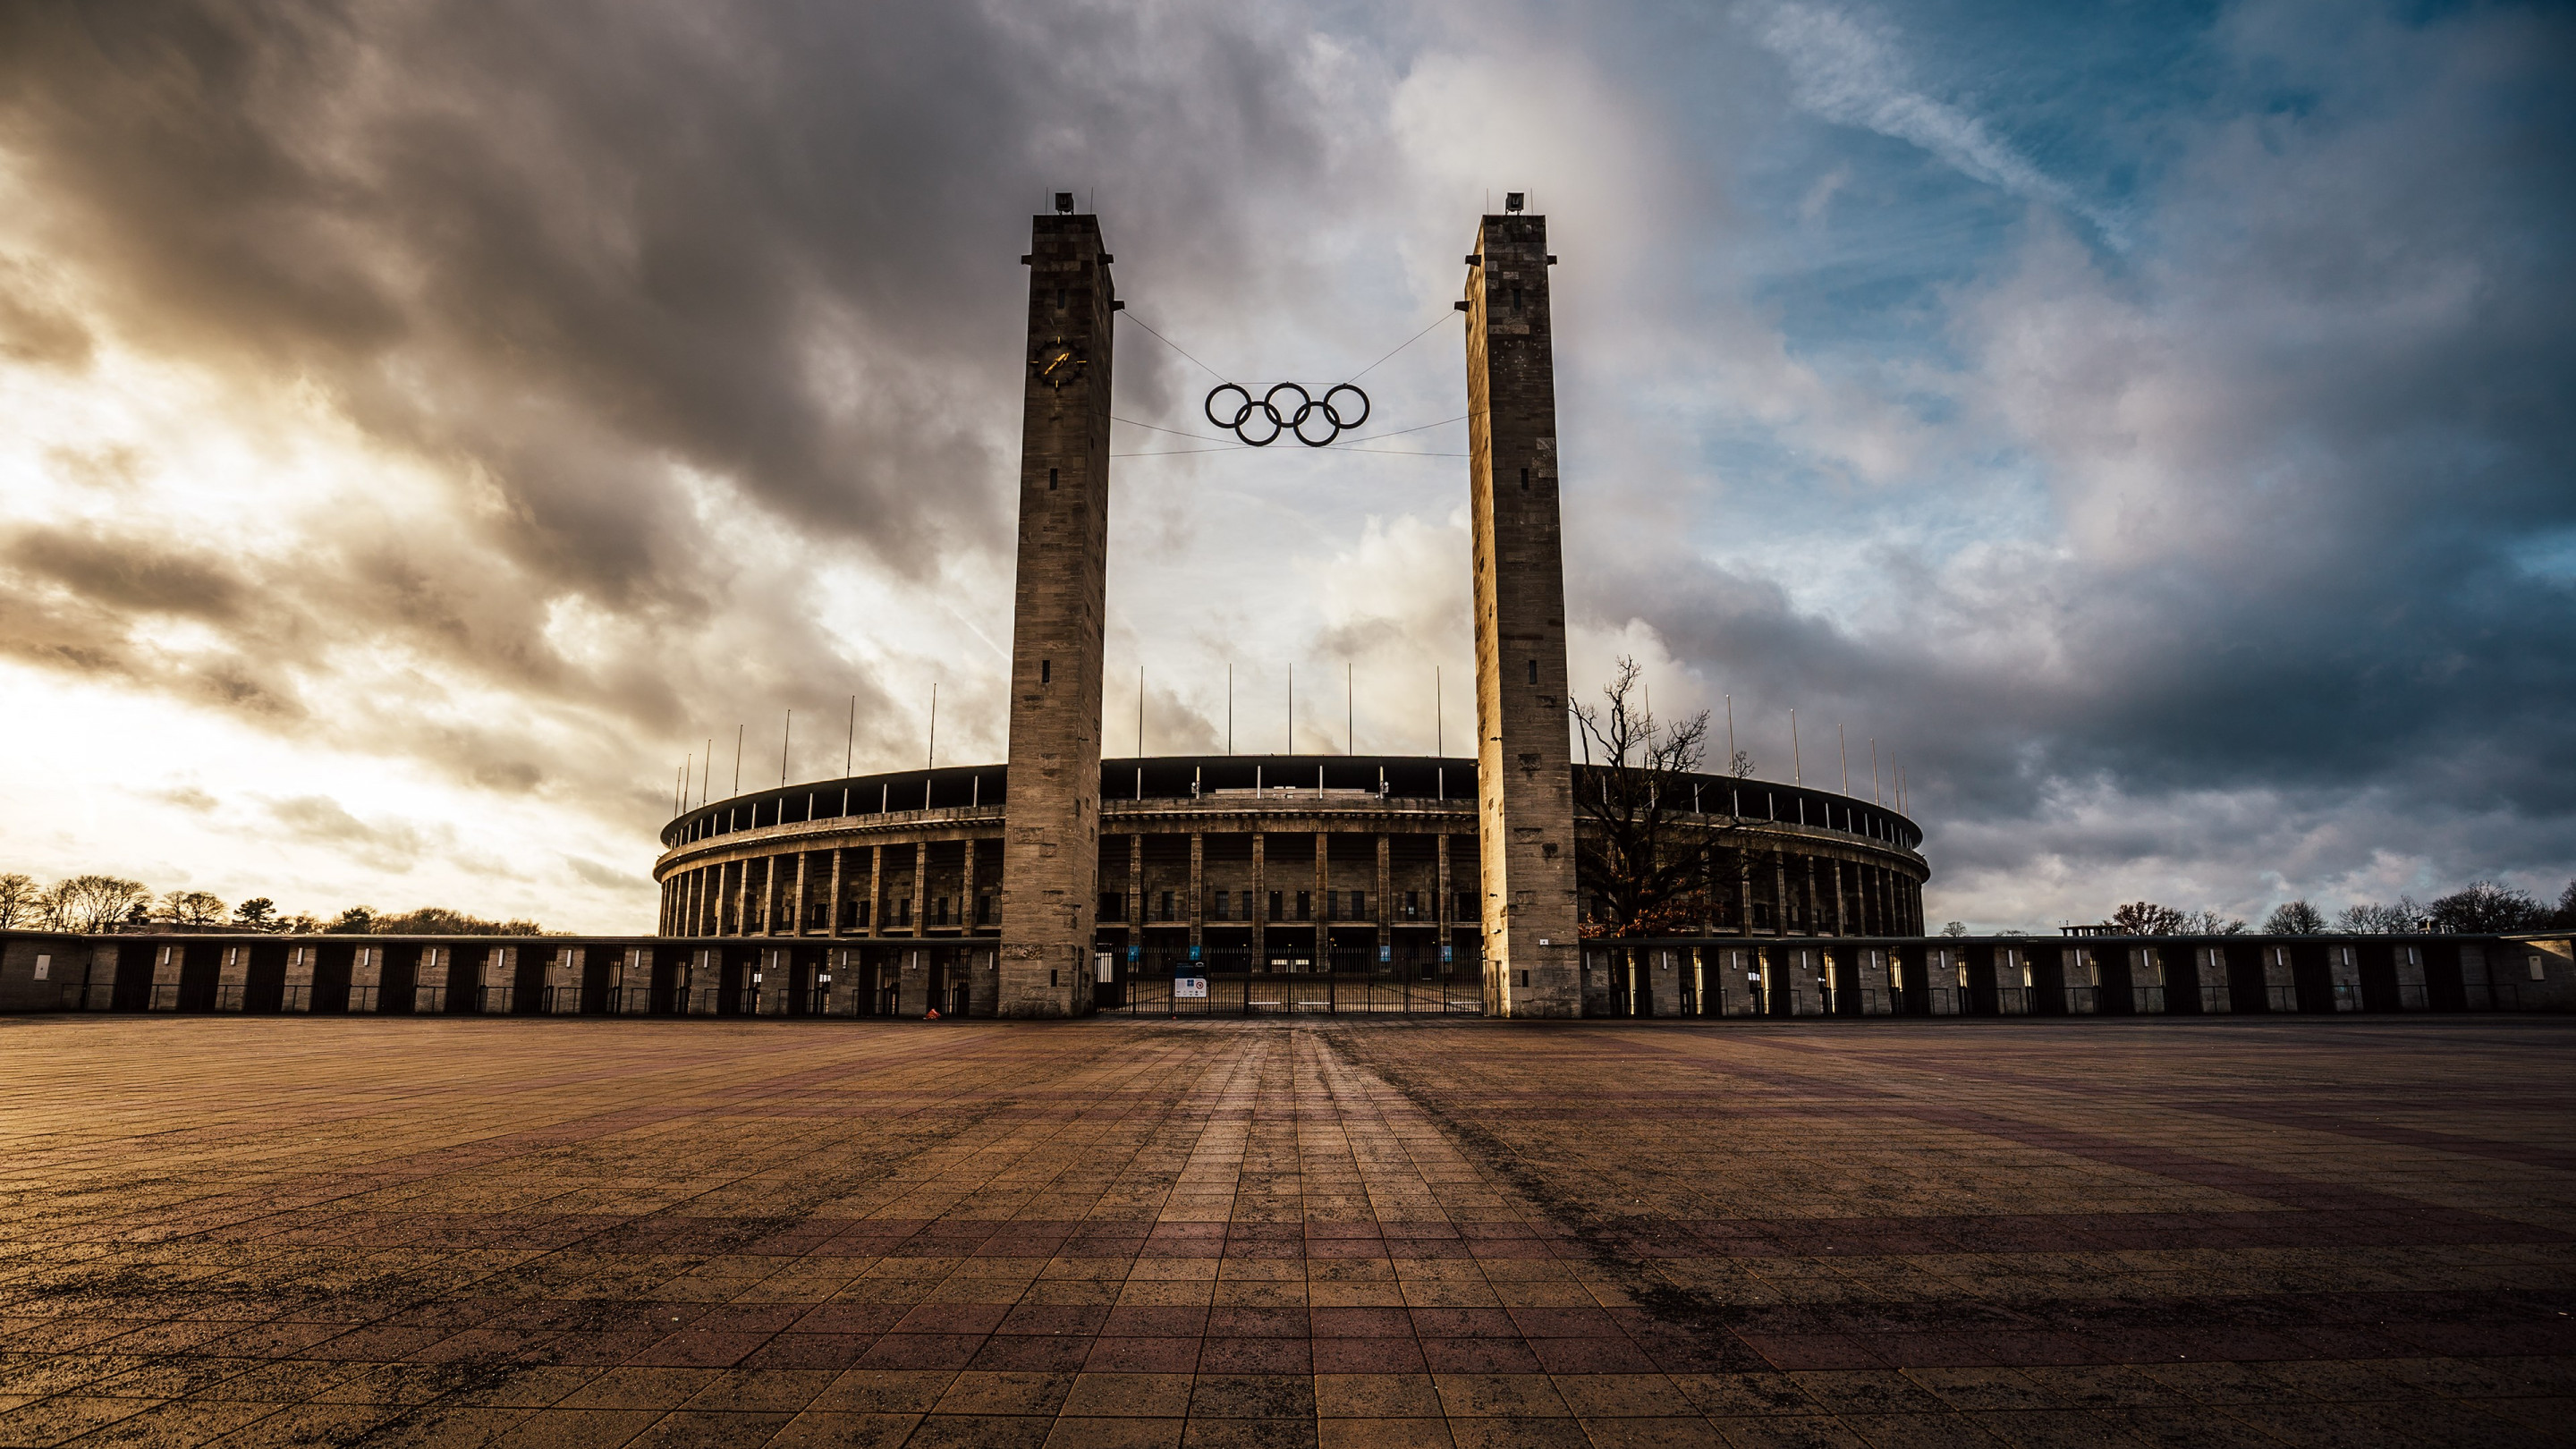 The Olympiastadion from Berlin wallpaper 2880x1620